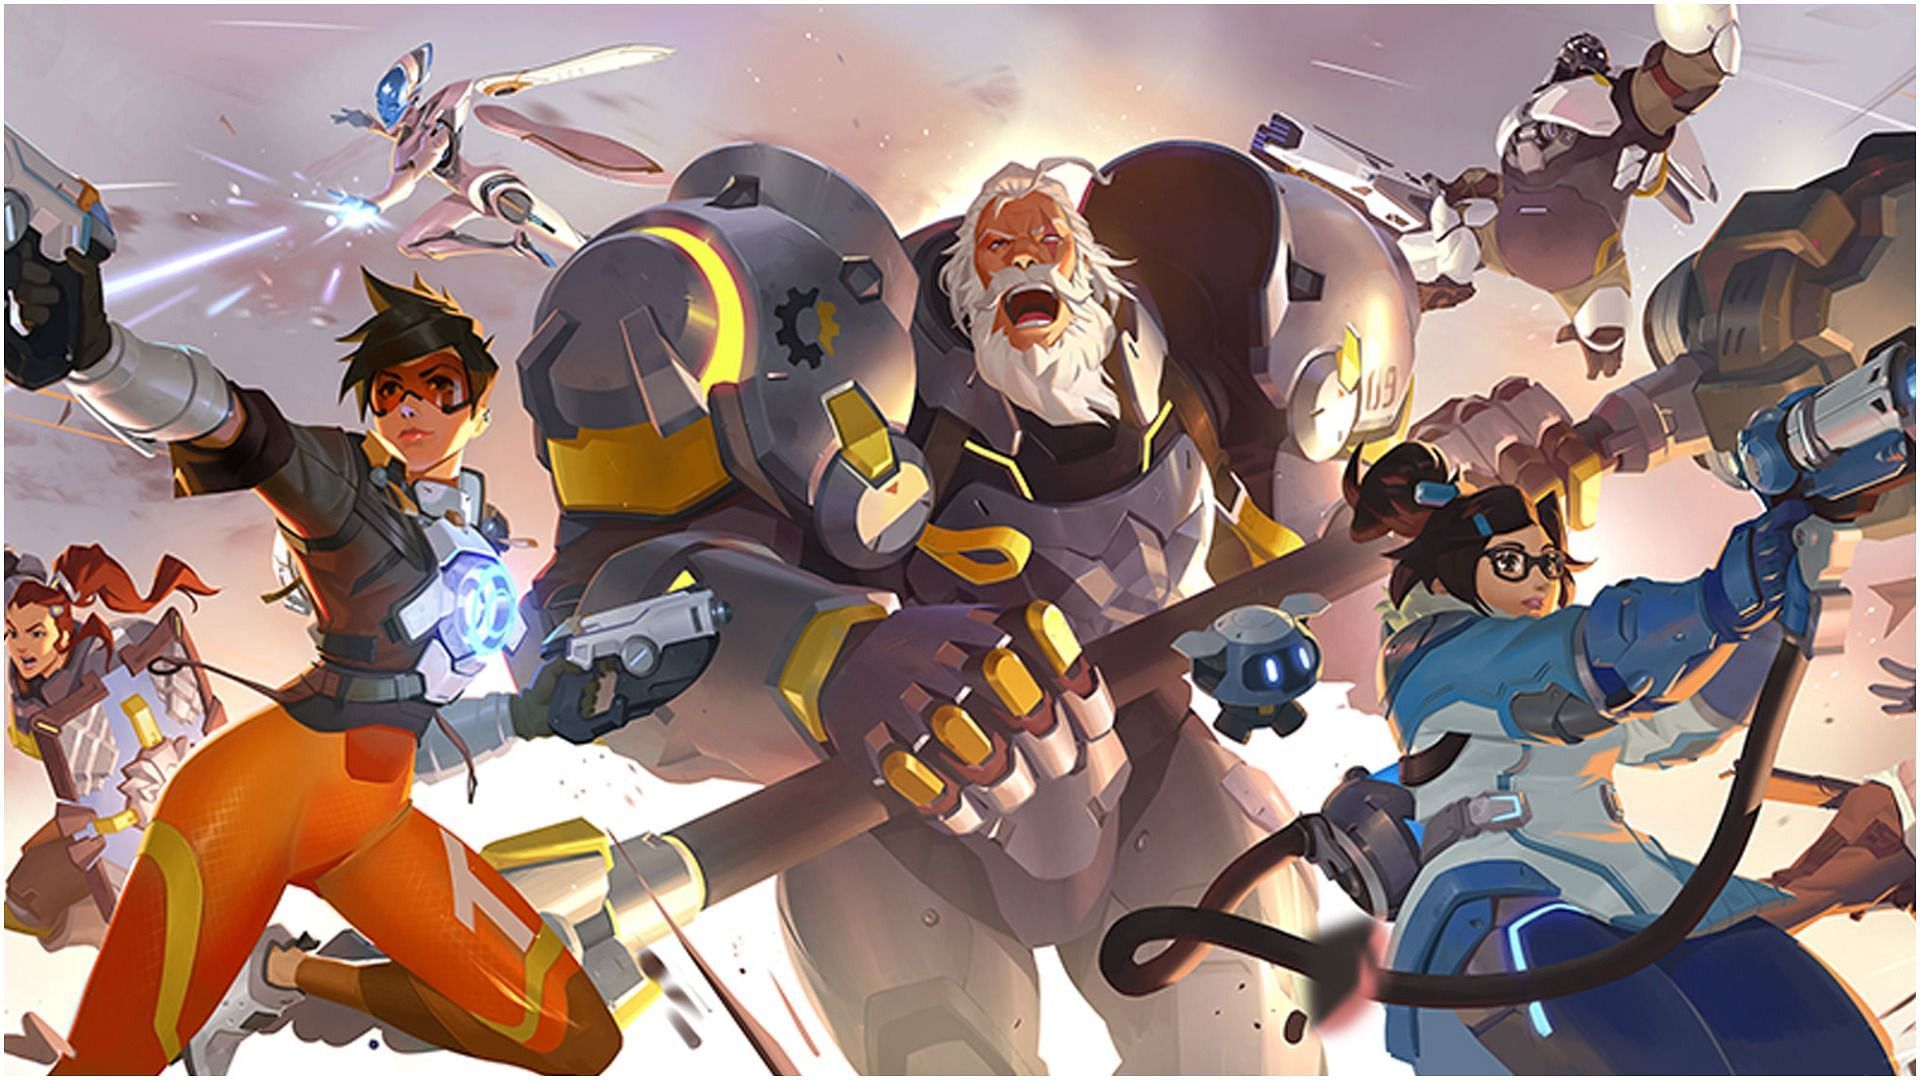 Overwatch 2 director promises better handling of the new title (Image via Blizzard)